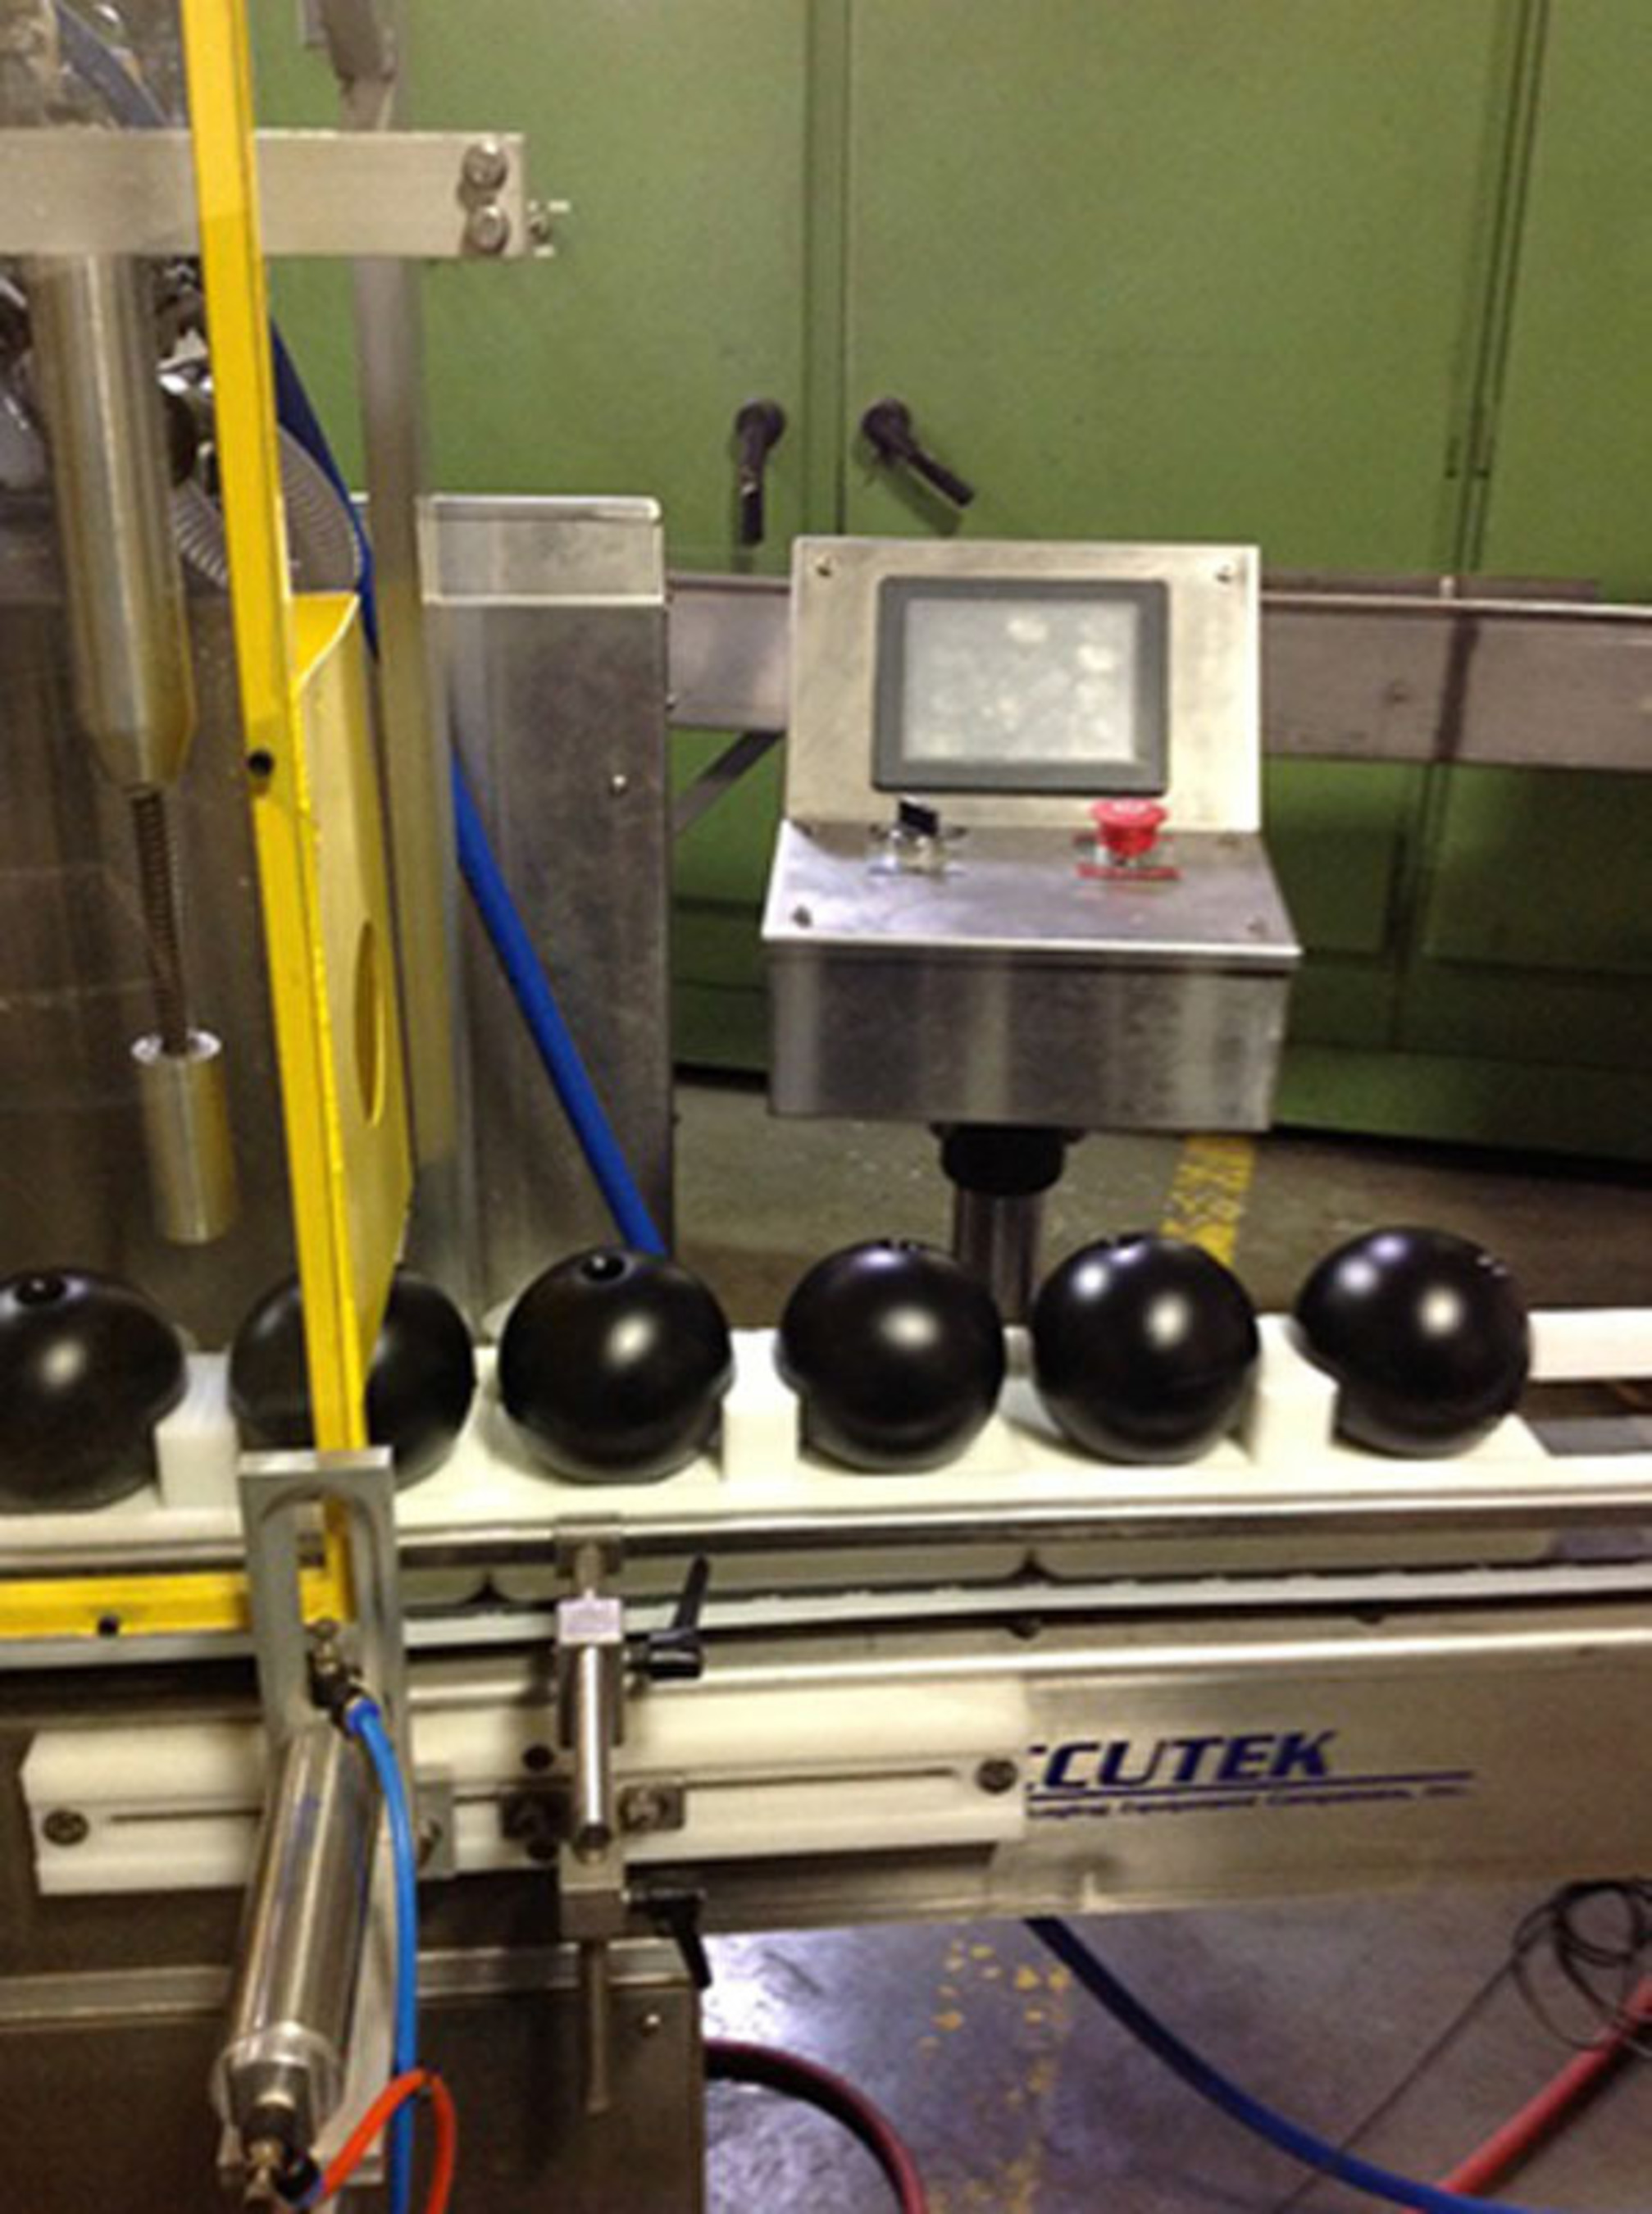 Hollow plastic shade balls leave the production line at XavierC LLC manufacturing facility in Colton, Ca. (PRNewsFoto/XavierC LLC) (PRNewsFoto/XAVIERC LLC)